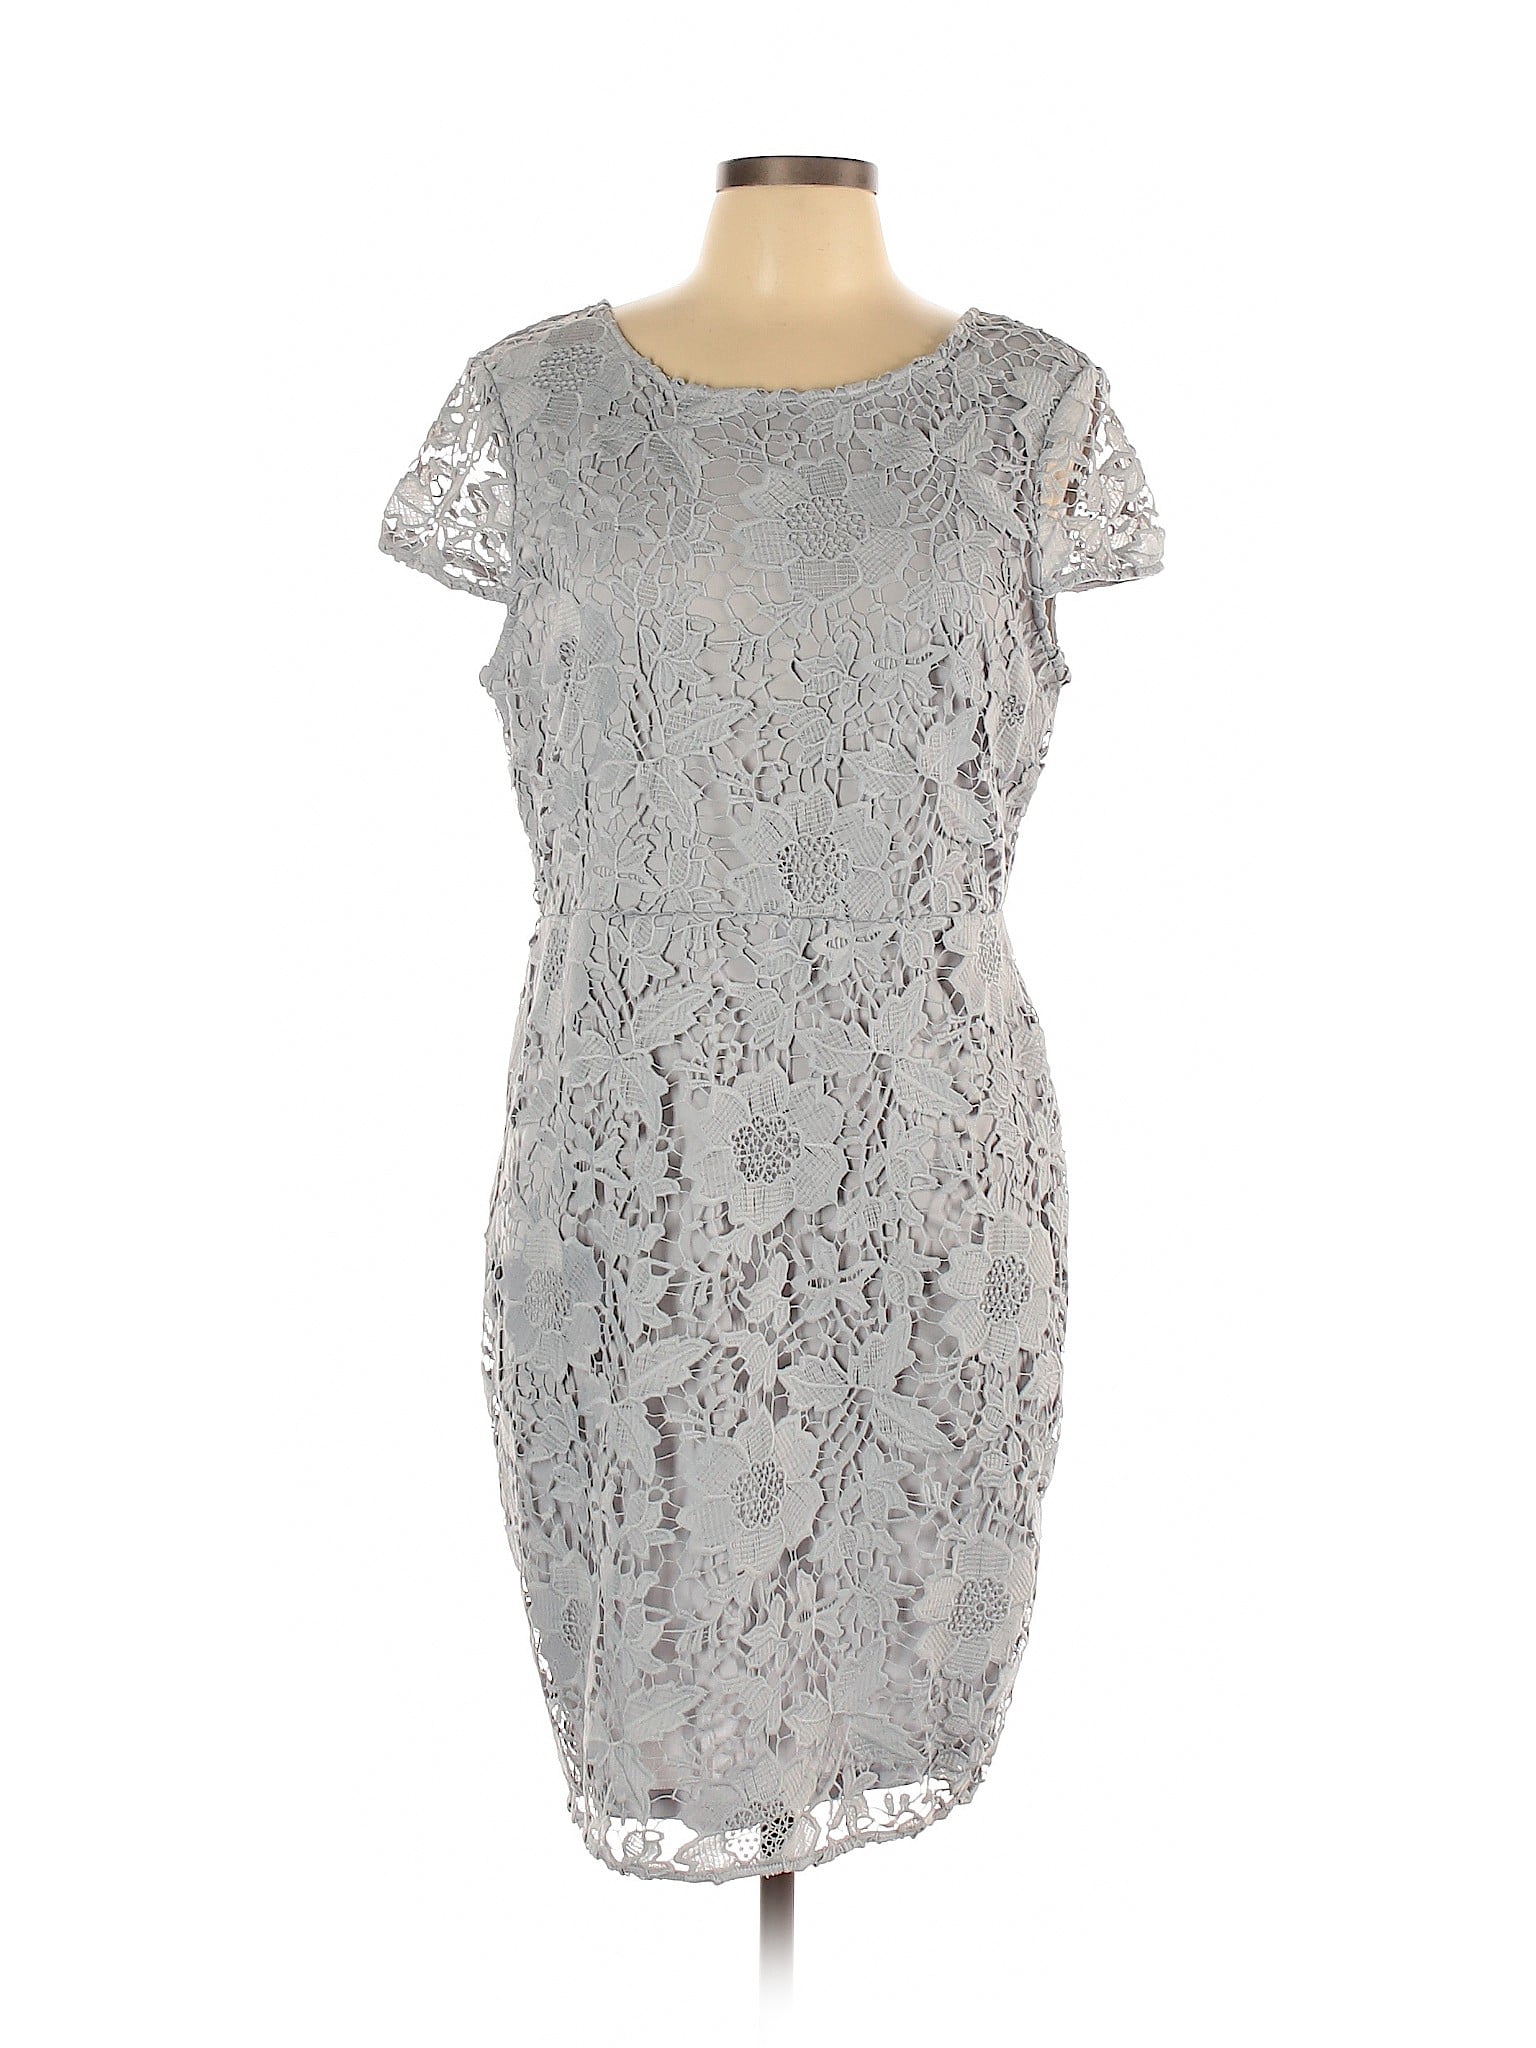 Dorothy Perkins - Pre-Owned Dorothy Perkins Women's Size 12 Cocktail ...